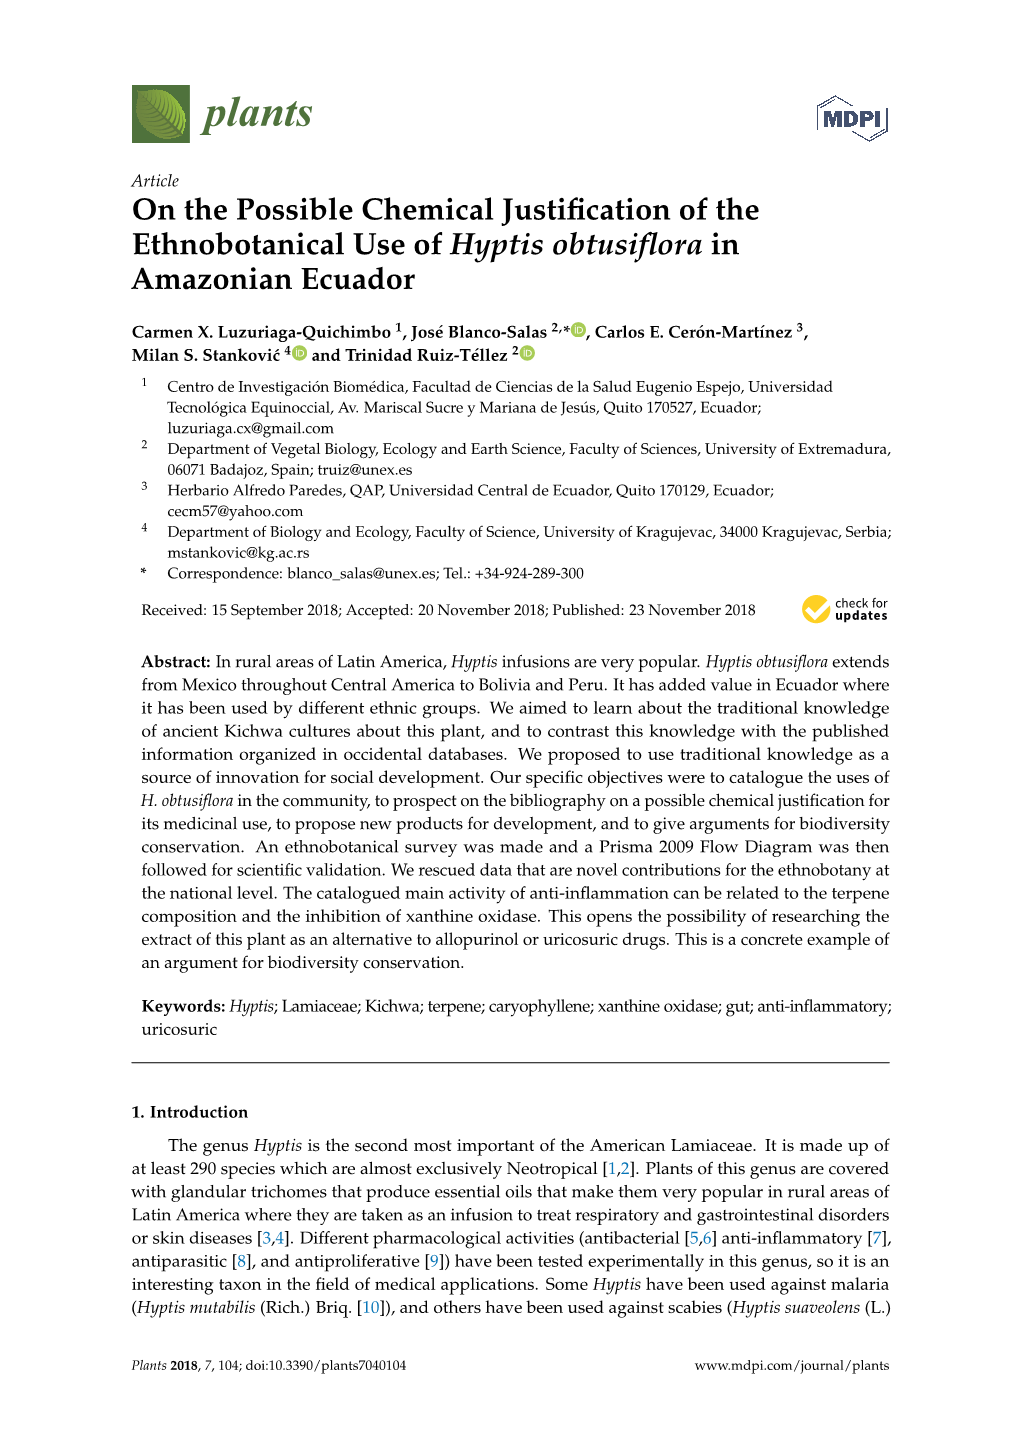 On the Possible Chemical Justification of the Ethnobotanical Use of Hyptis